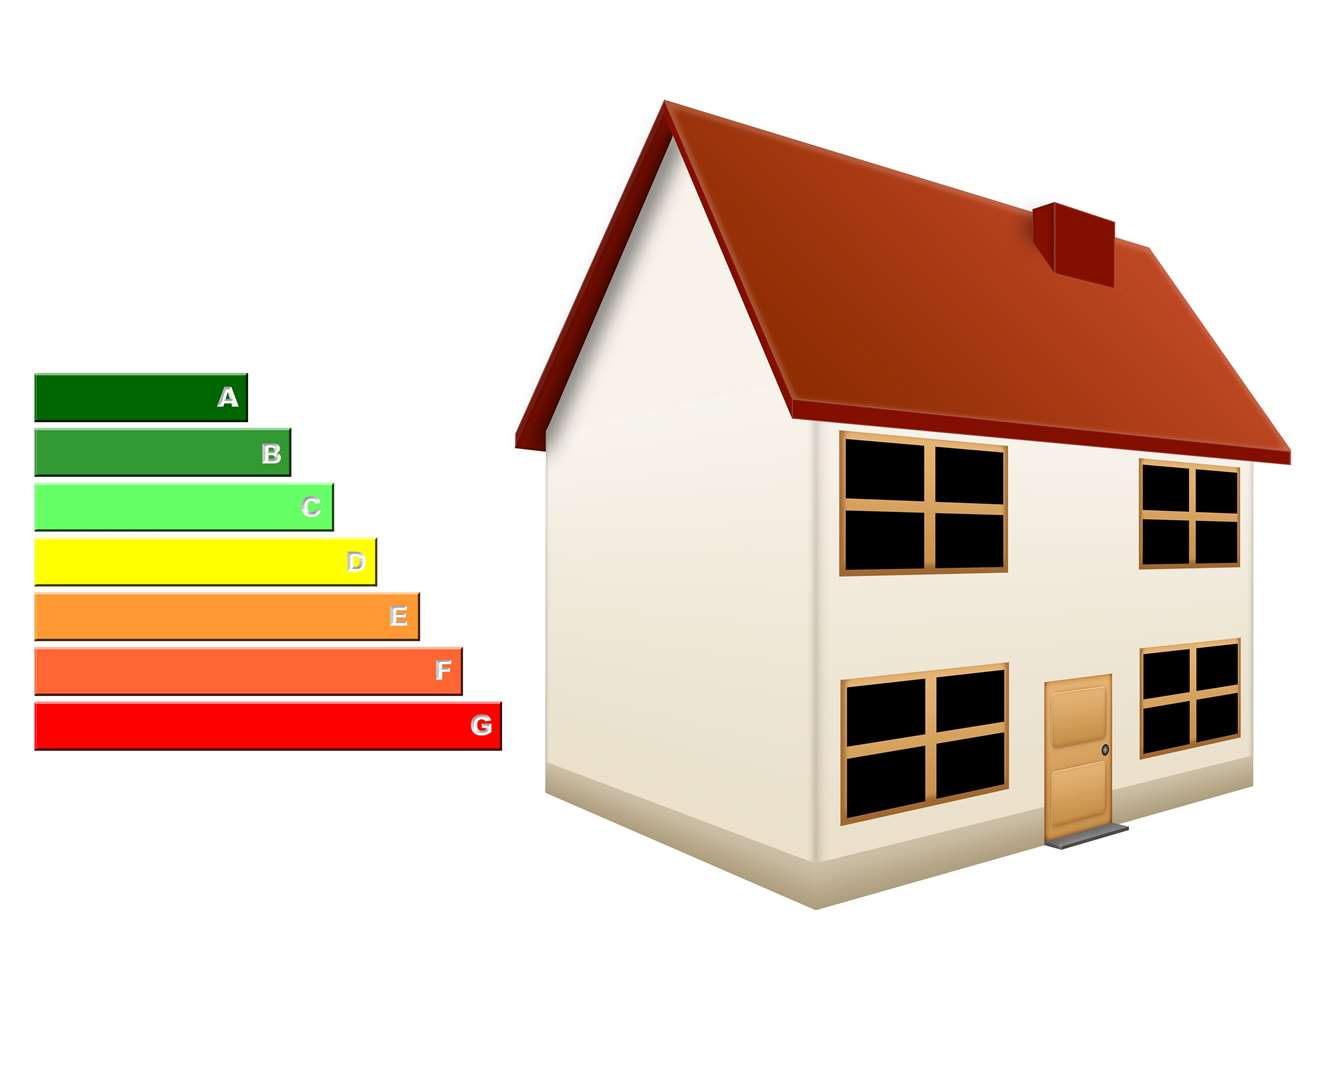 Councillors want to make homes more energy efficient and reduce fuel poverty.